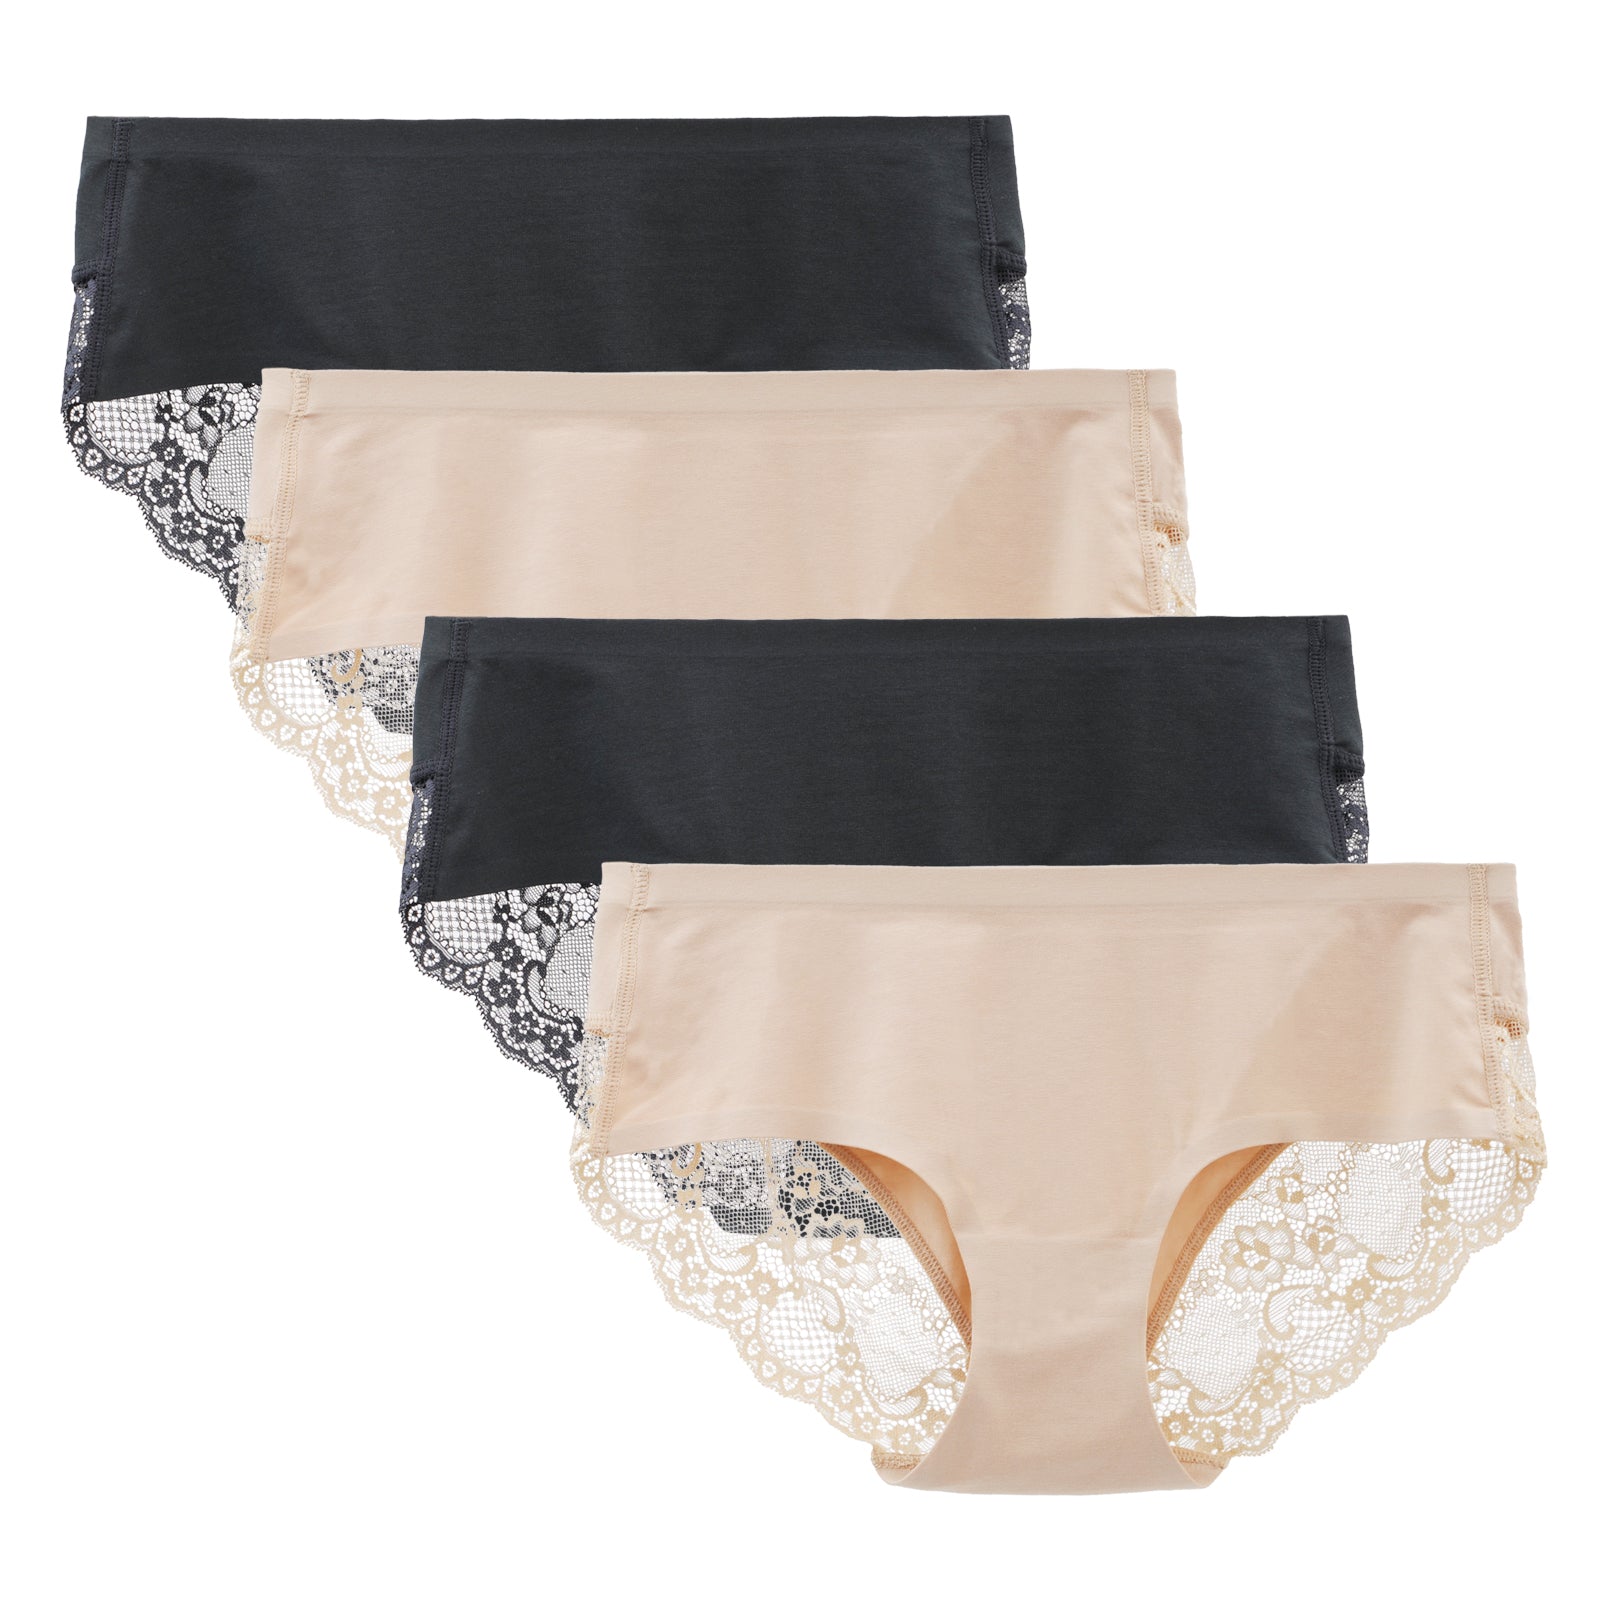 LIQQY Women's 4 Pack Combed Cotton Lace Full Coverage High Rise Brief